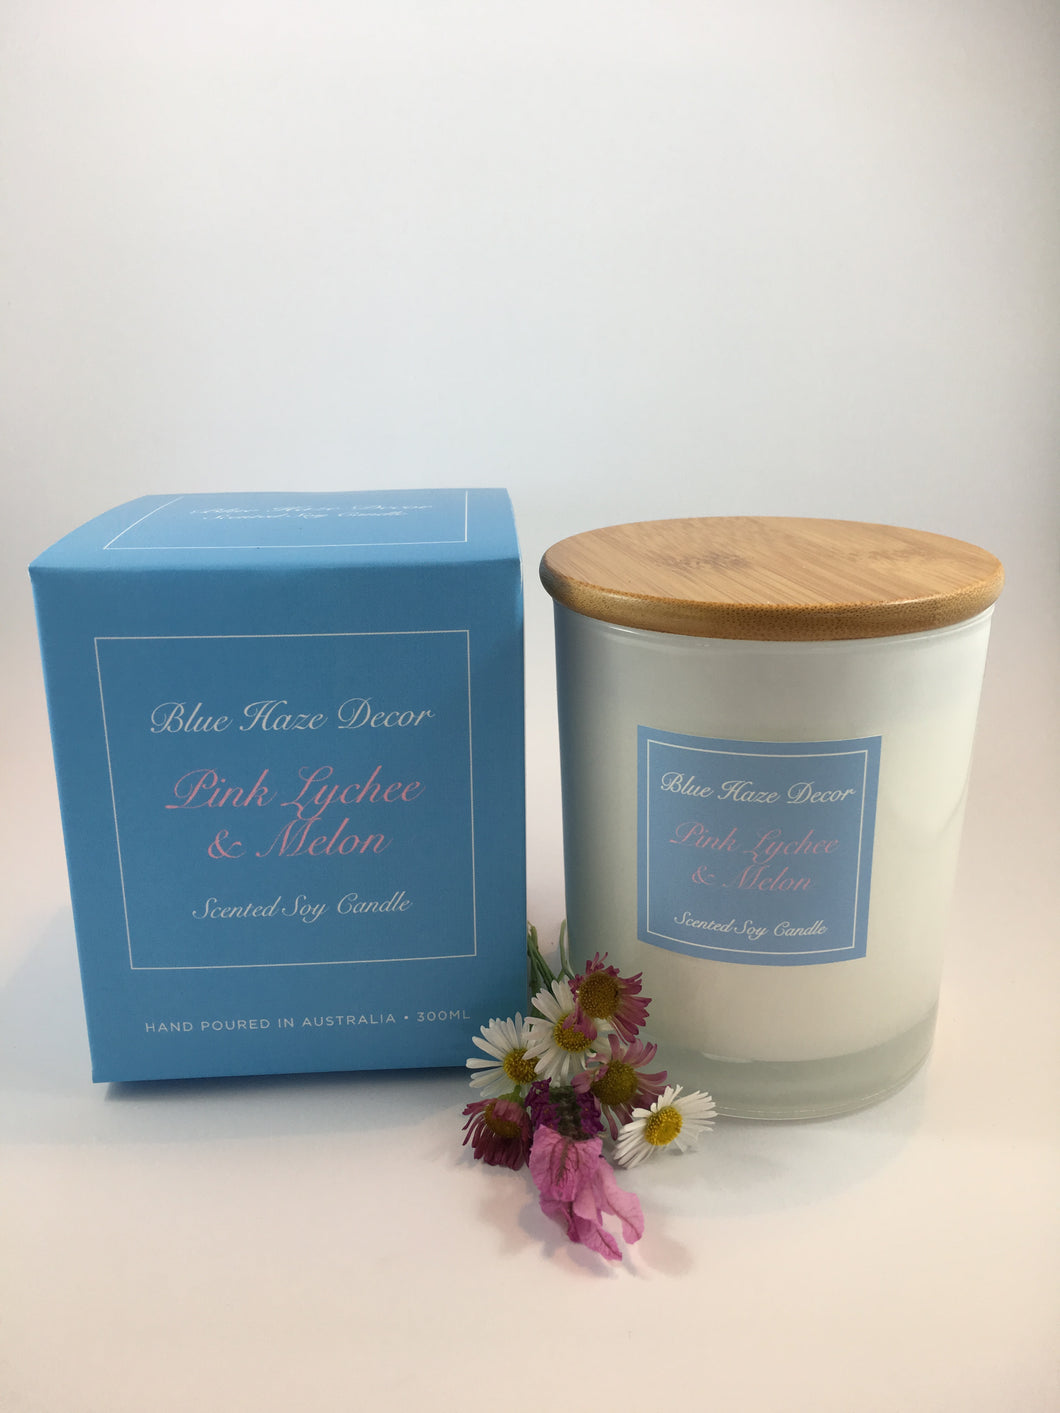 Pink Lychee & Melon Candle